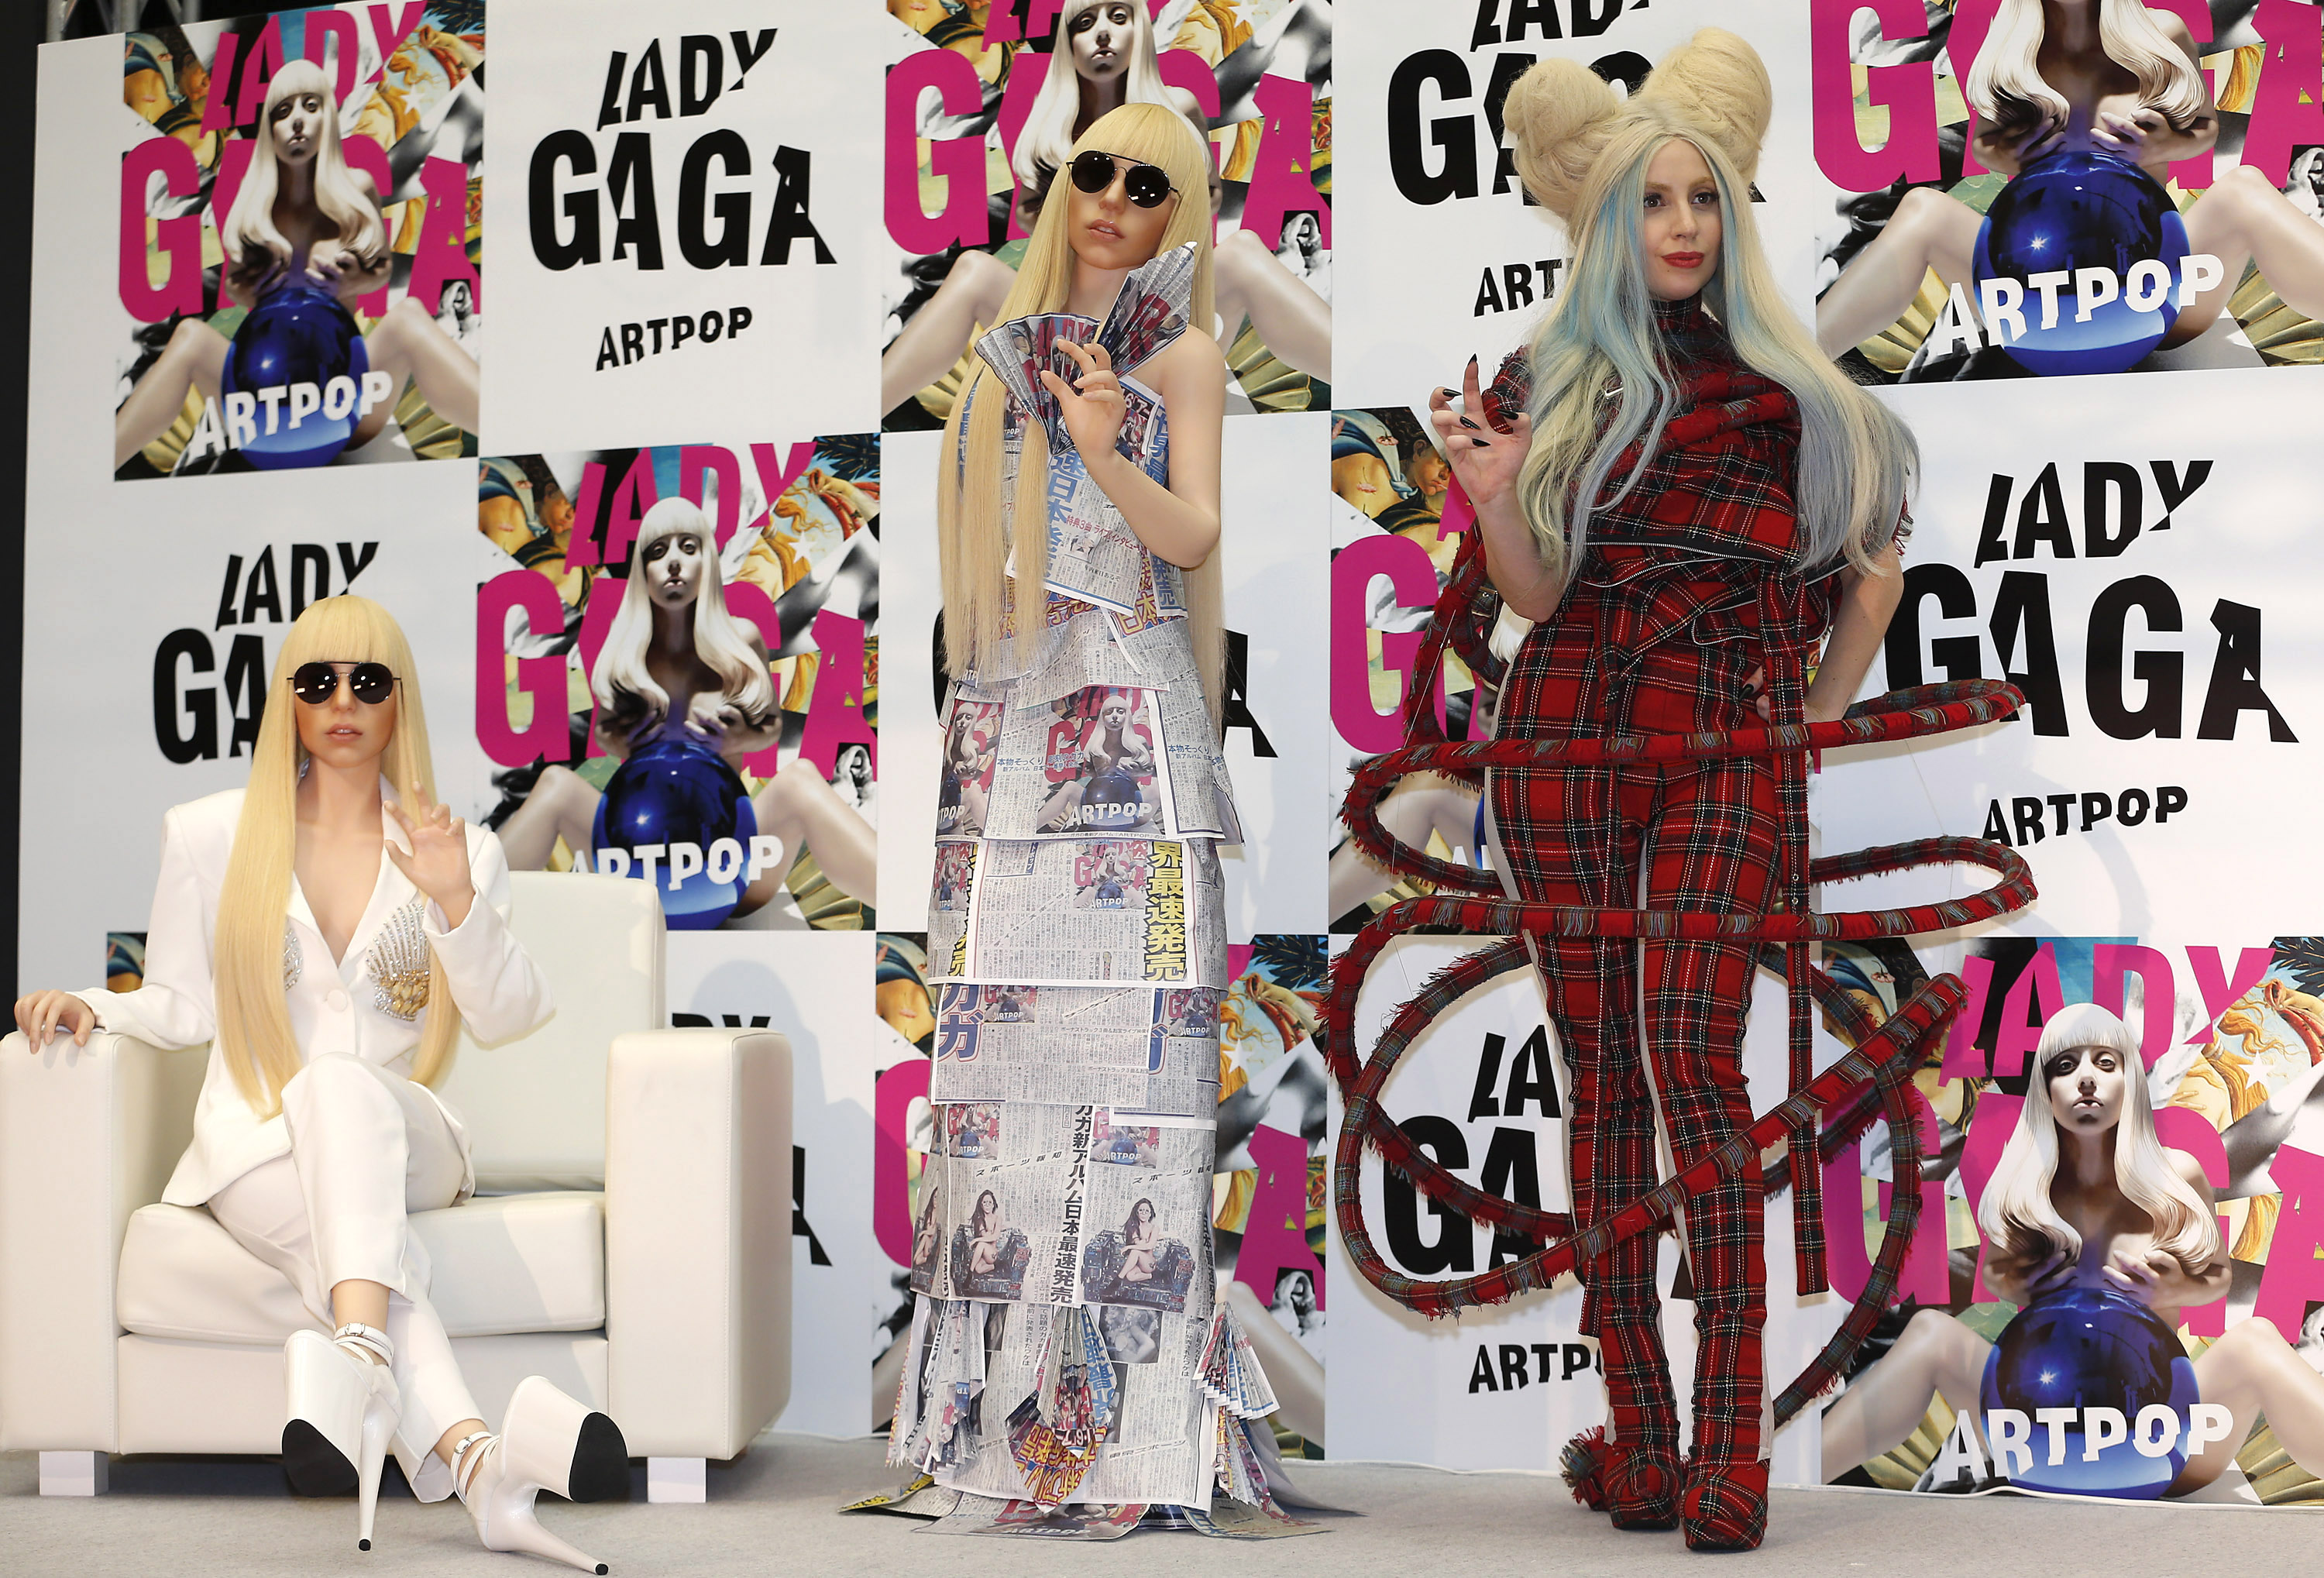 Pop art: Singer Lady Gaga poses for photographers with her life-size dolls during a news conference Sunday in Tokyo to promote her album 'Artpop.' | AP